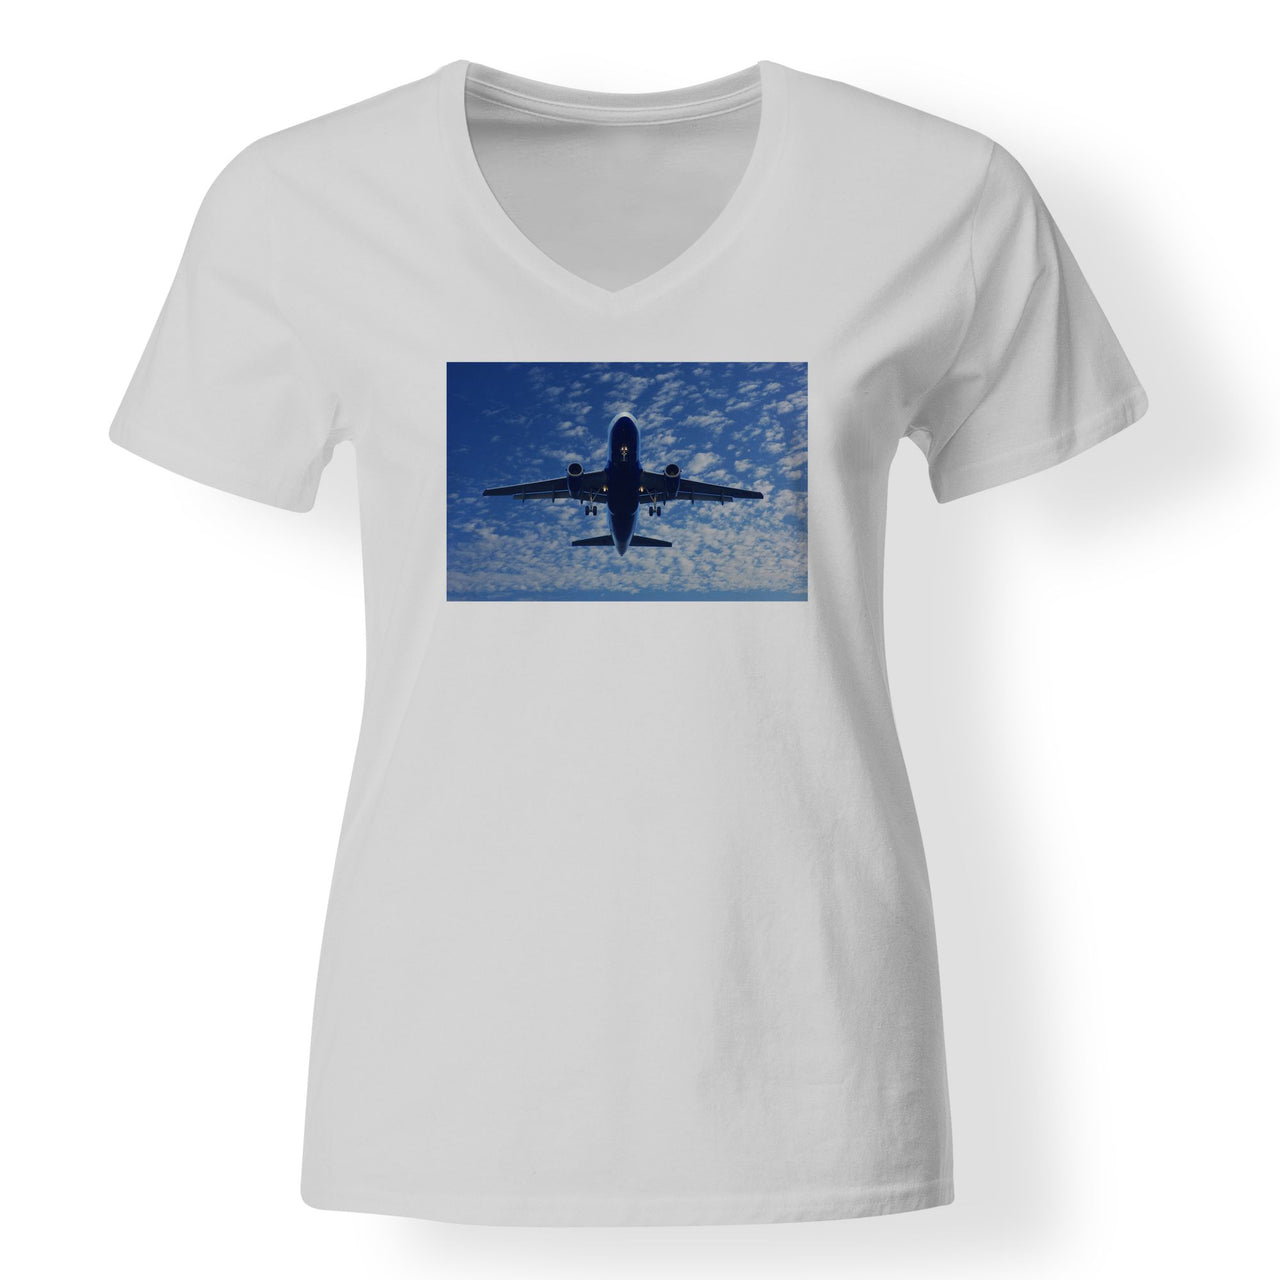 Airplane From Below Designed V-Neck T-Shirts